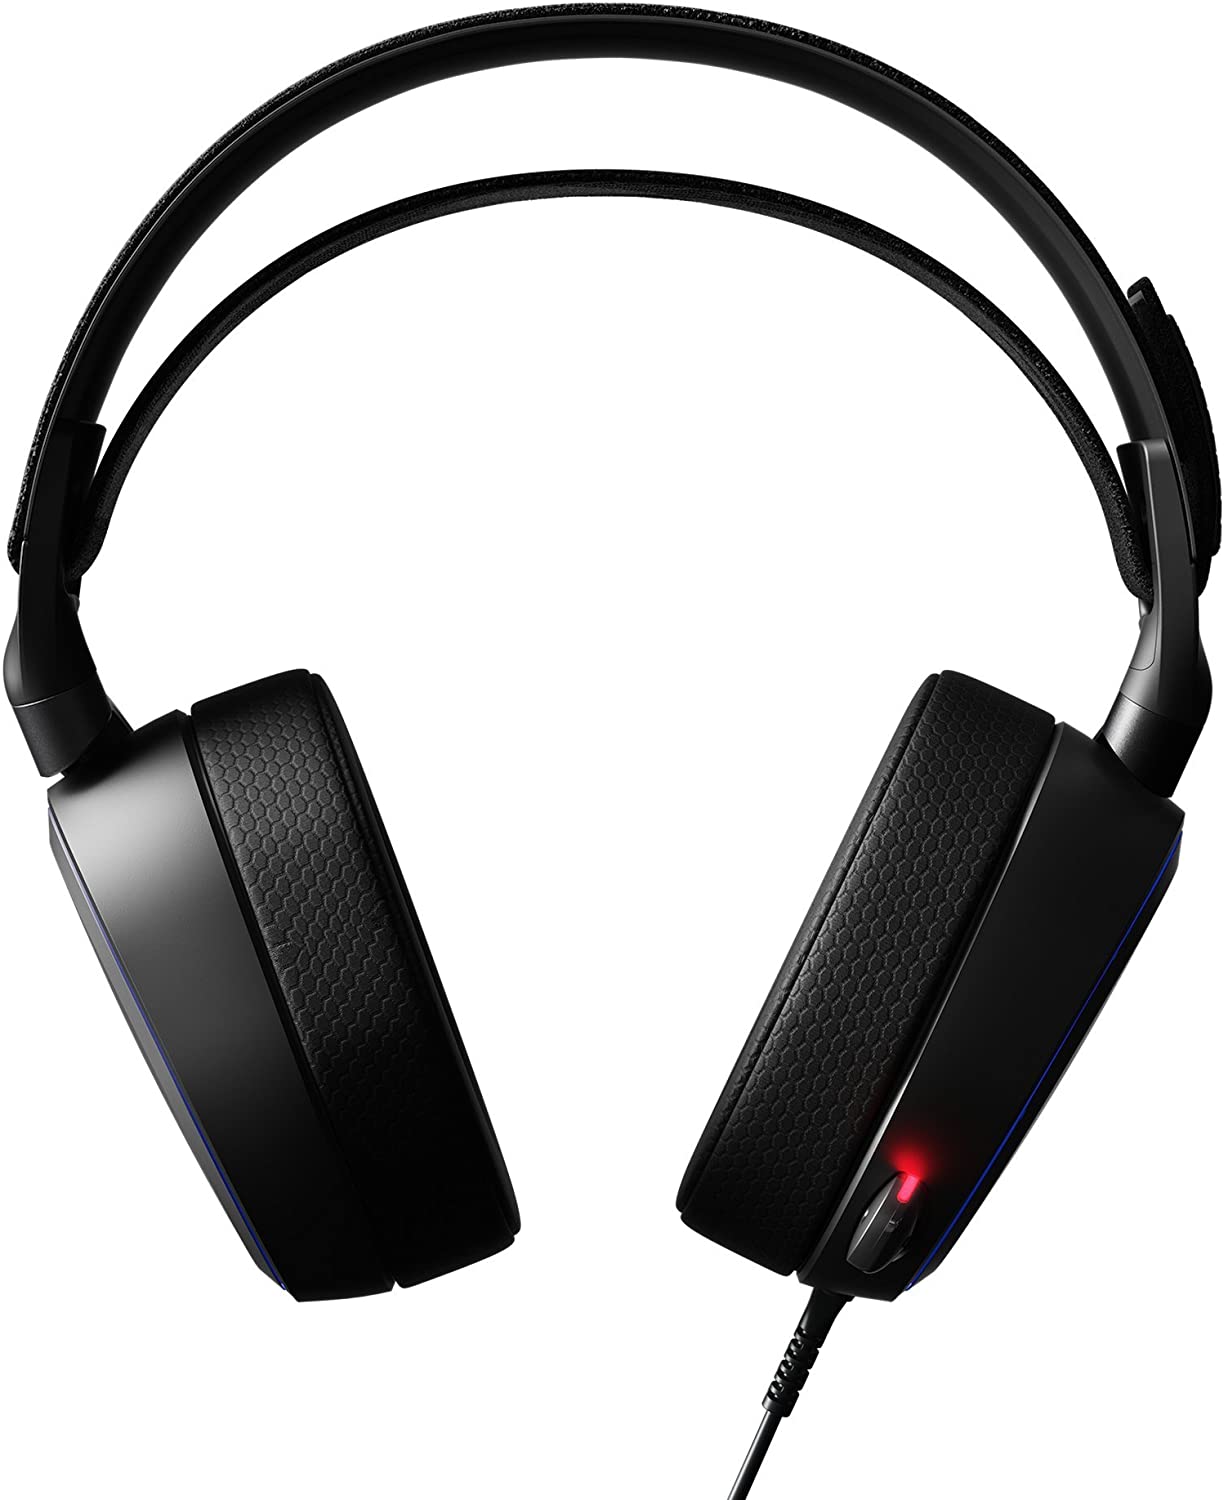 Steelseries Arctis Pro with GameDAC for Hi-Res Gaming Headset system (PS4)